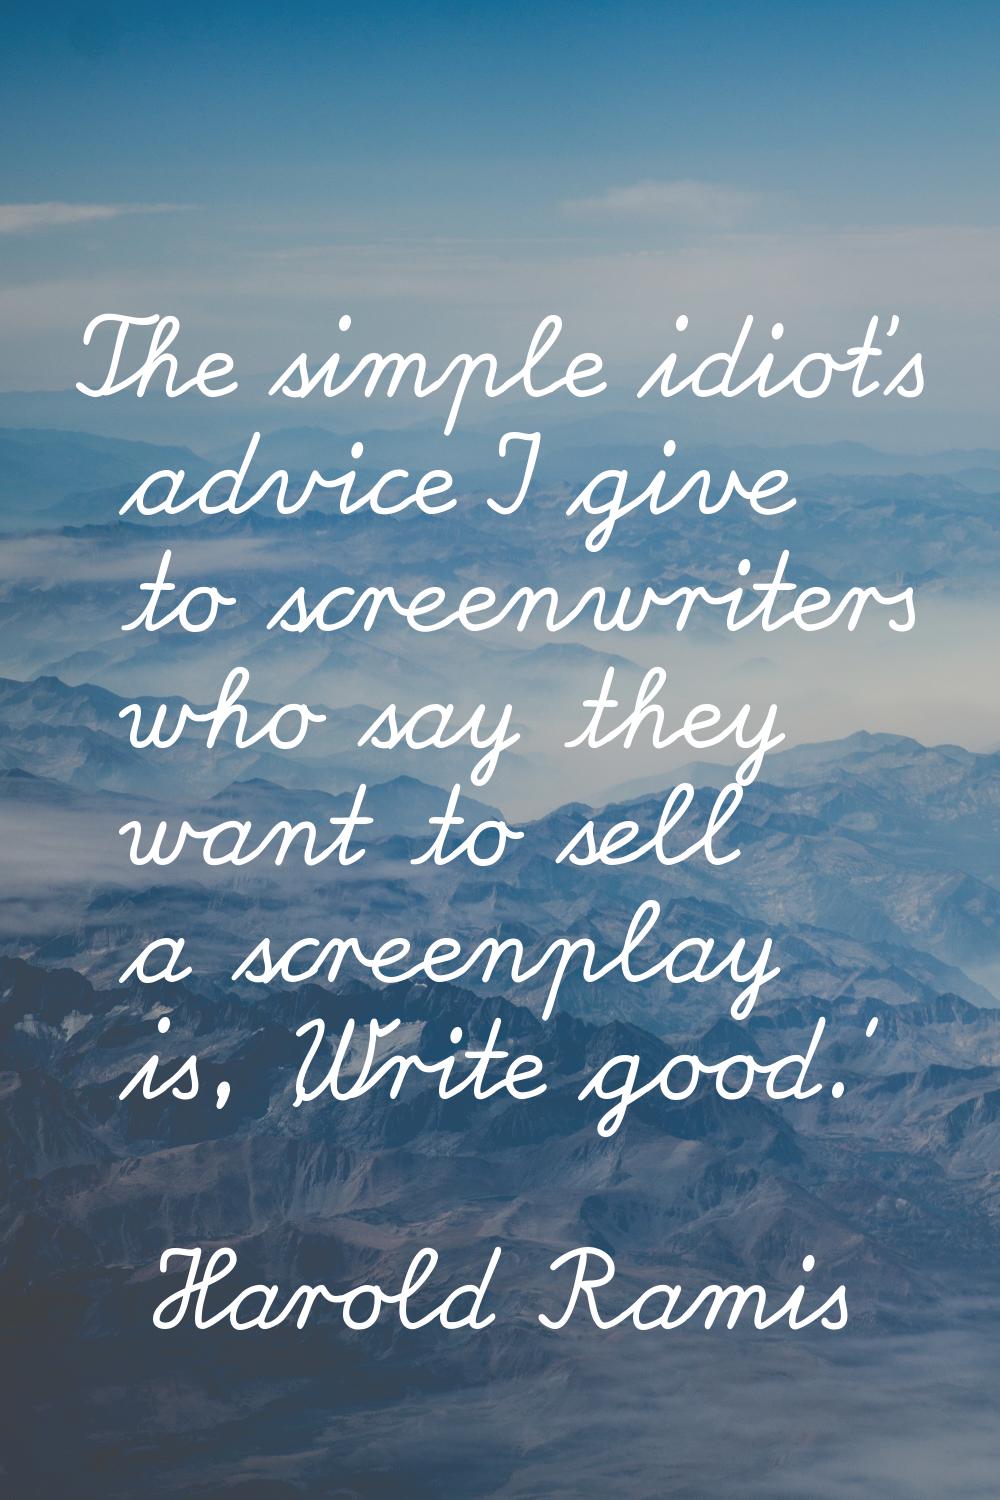 The simple idiot's advice I give to screenwriters who say they want to sell a screenplay is, 'Write